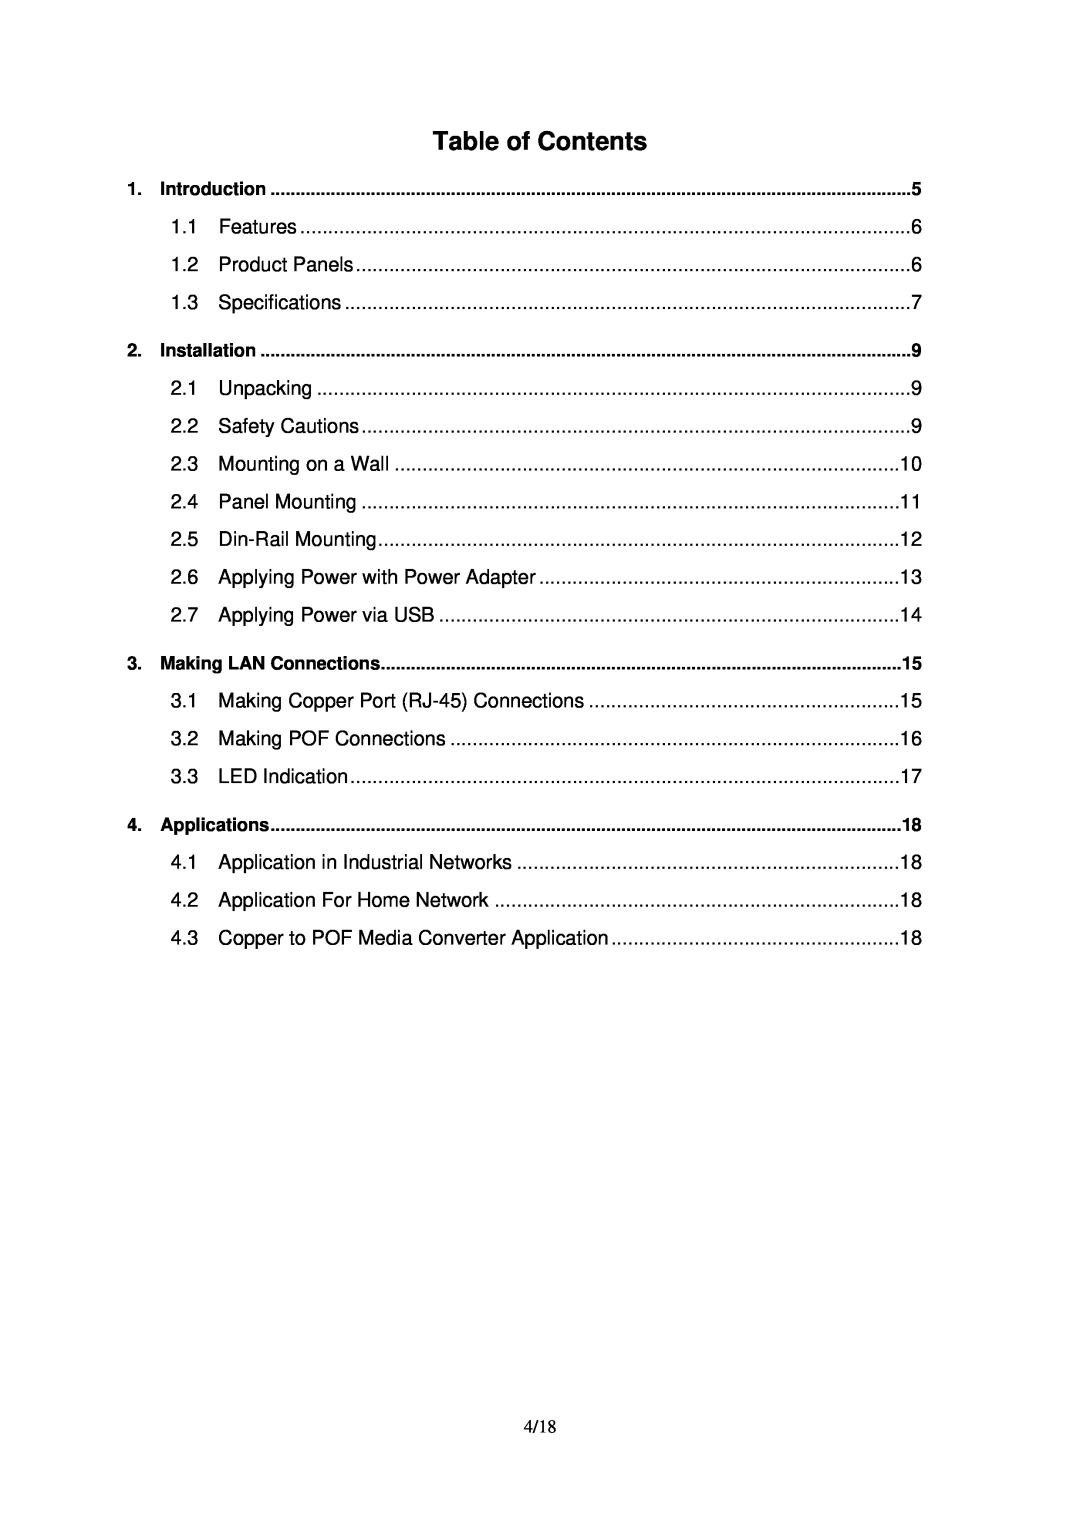 KTI Networks KCD-303P-A1, KCD-303P-A2, KCD-303P-B1, KCD-303P-B2 manual Table of Contents 